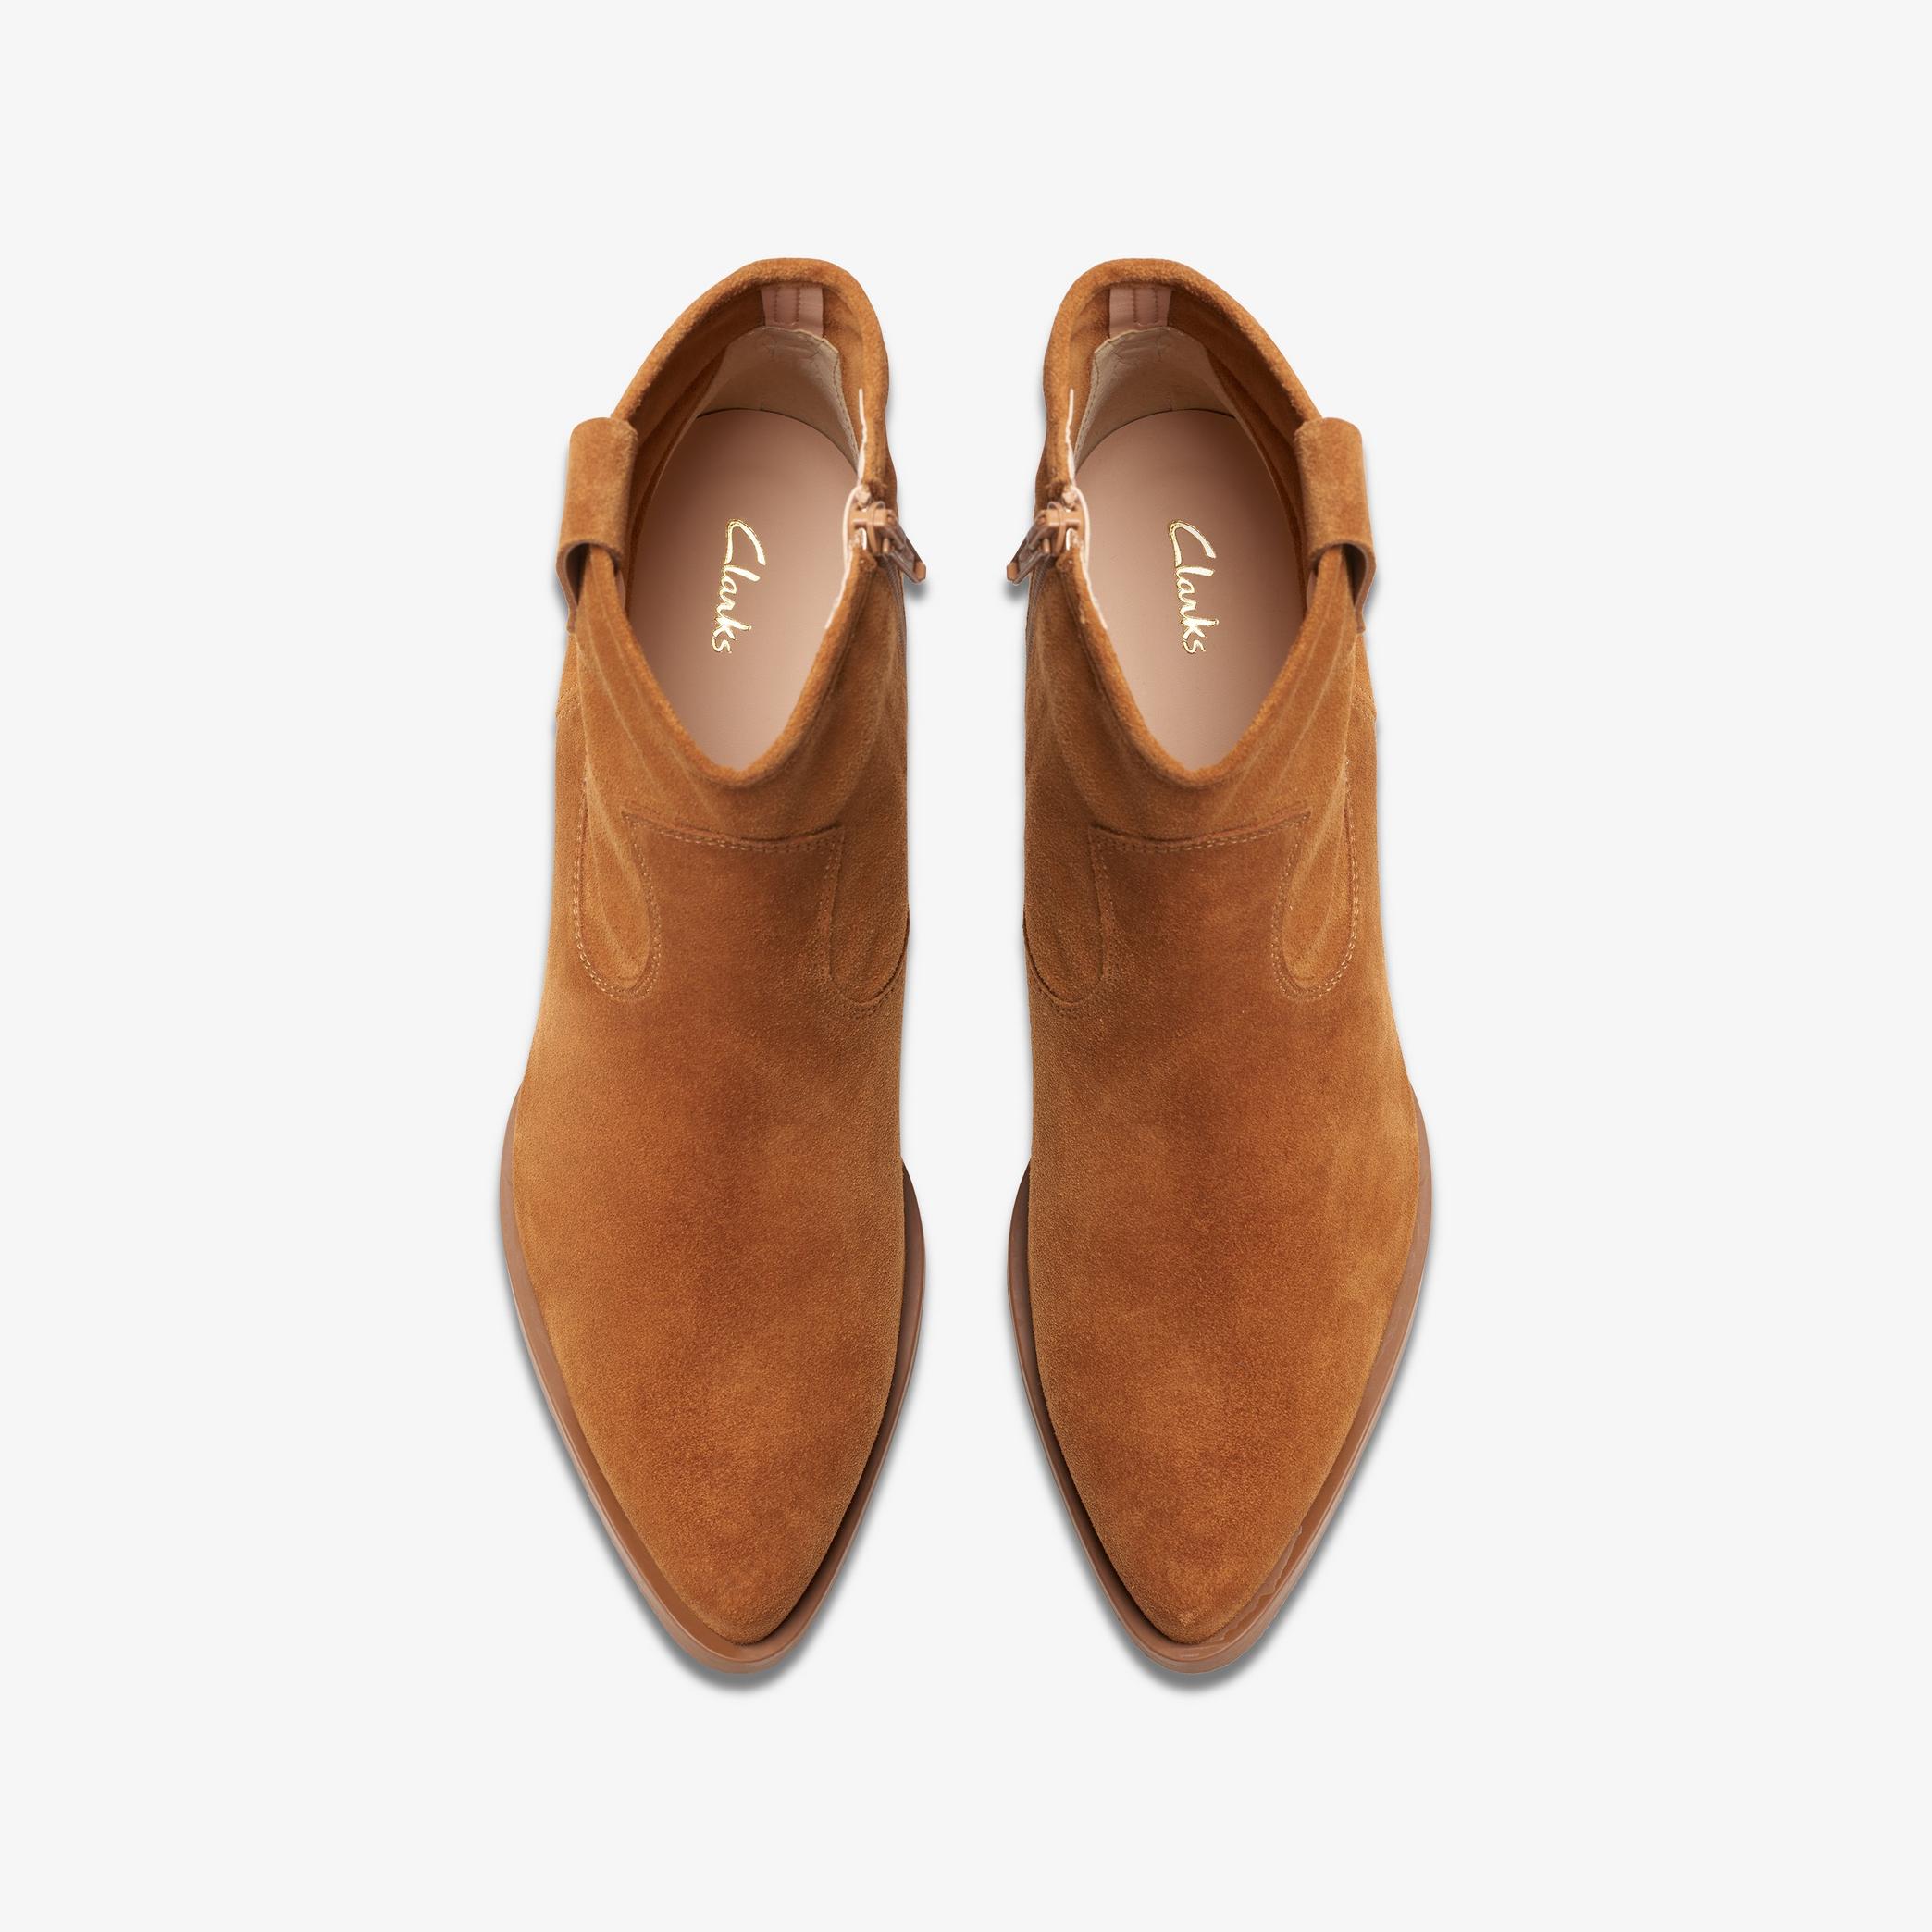 Elder Rae Tan Suede Ankle Boots, view 7 of 7